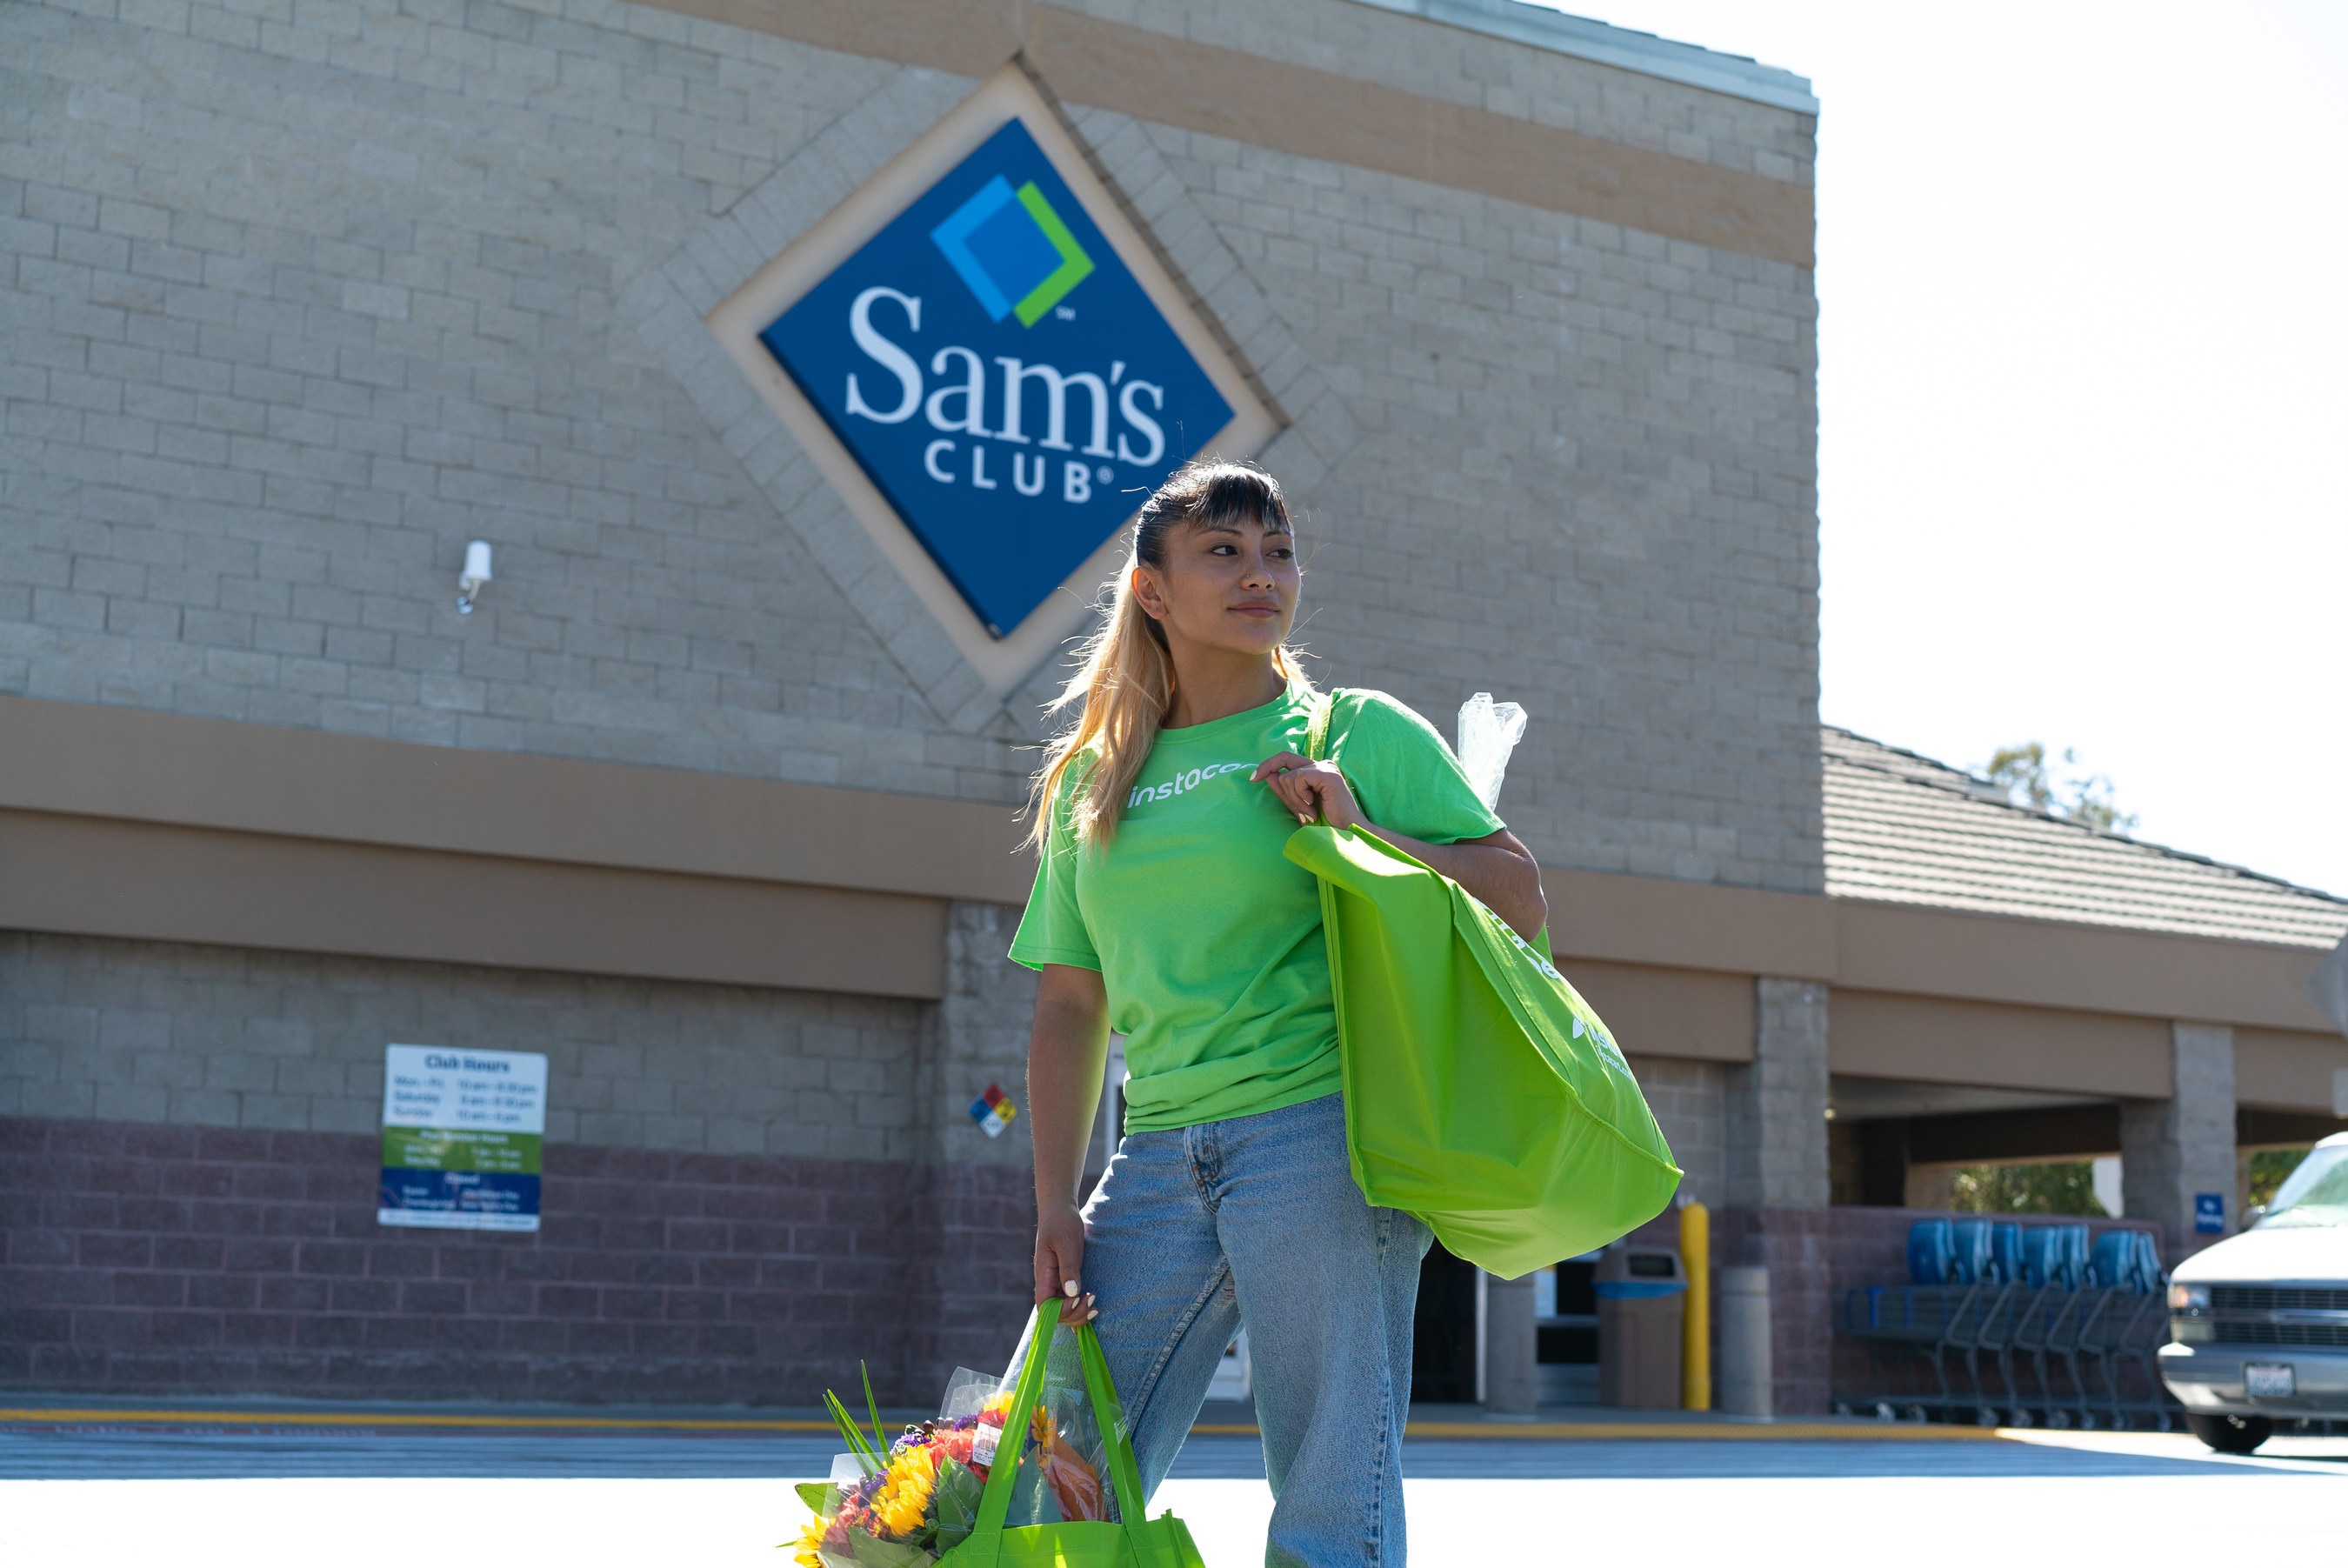 Sam’s Club, Instacart expand same-day delivery services